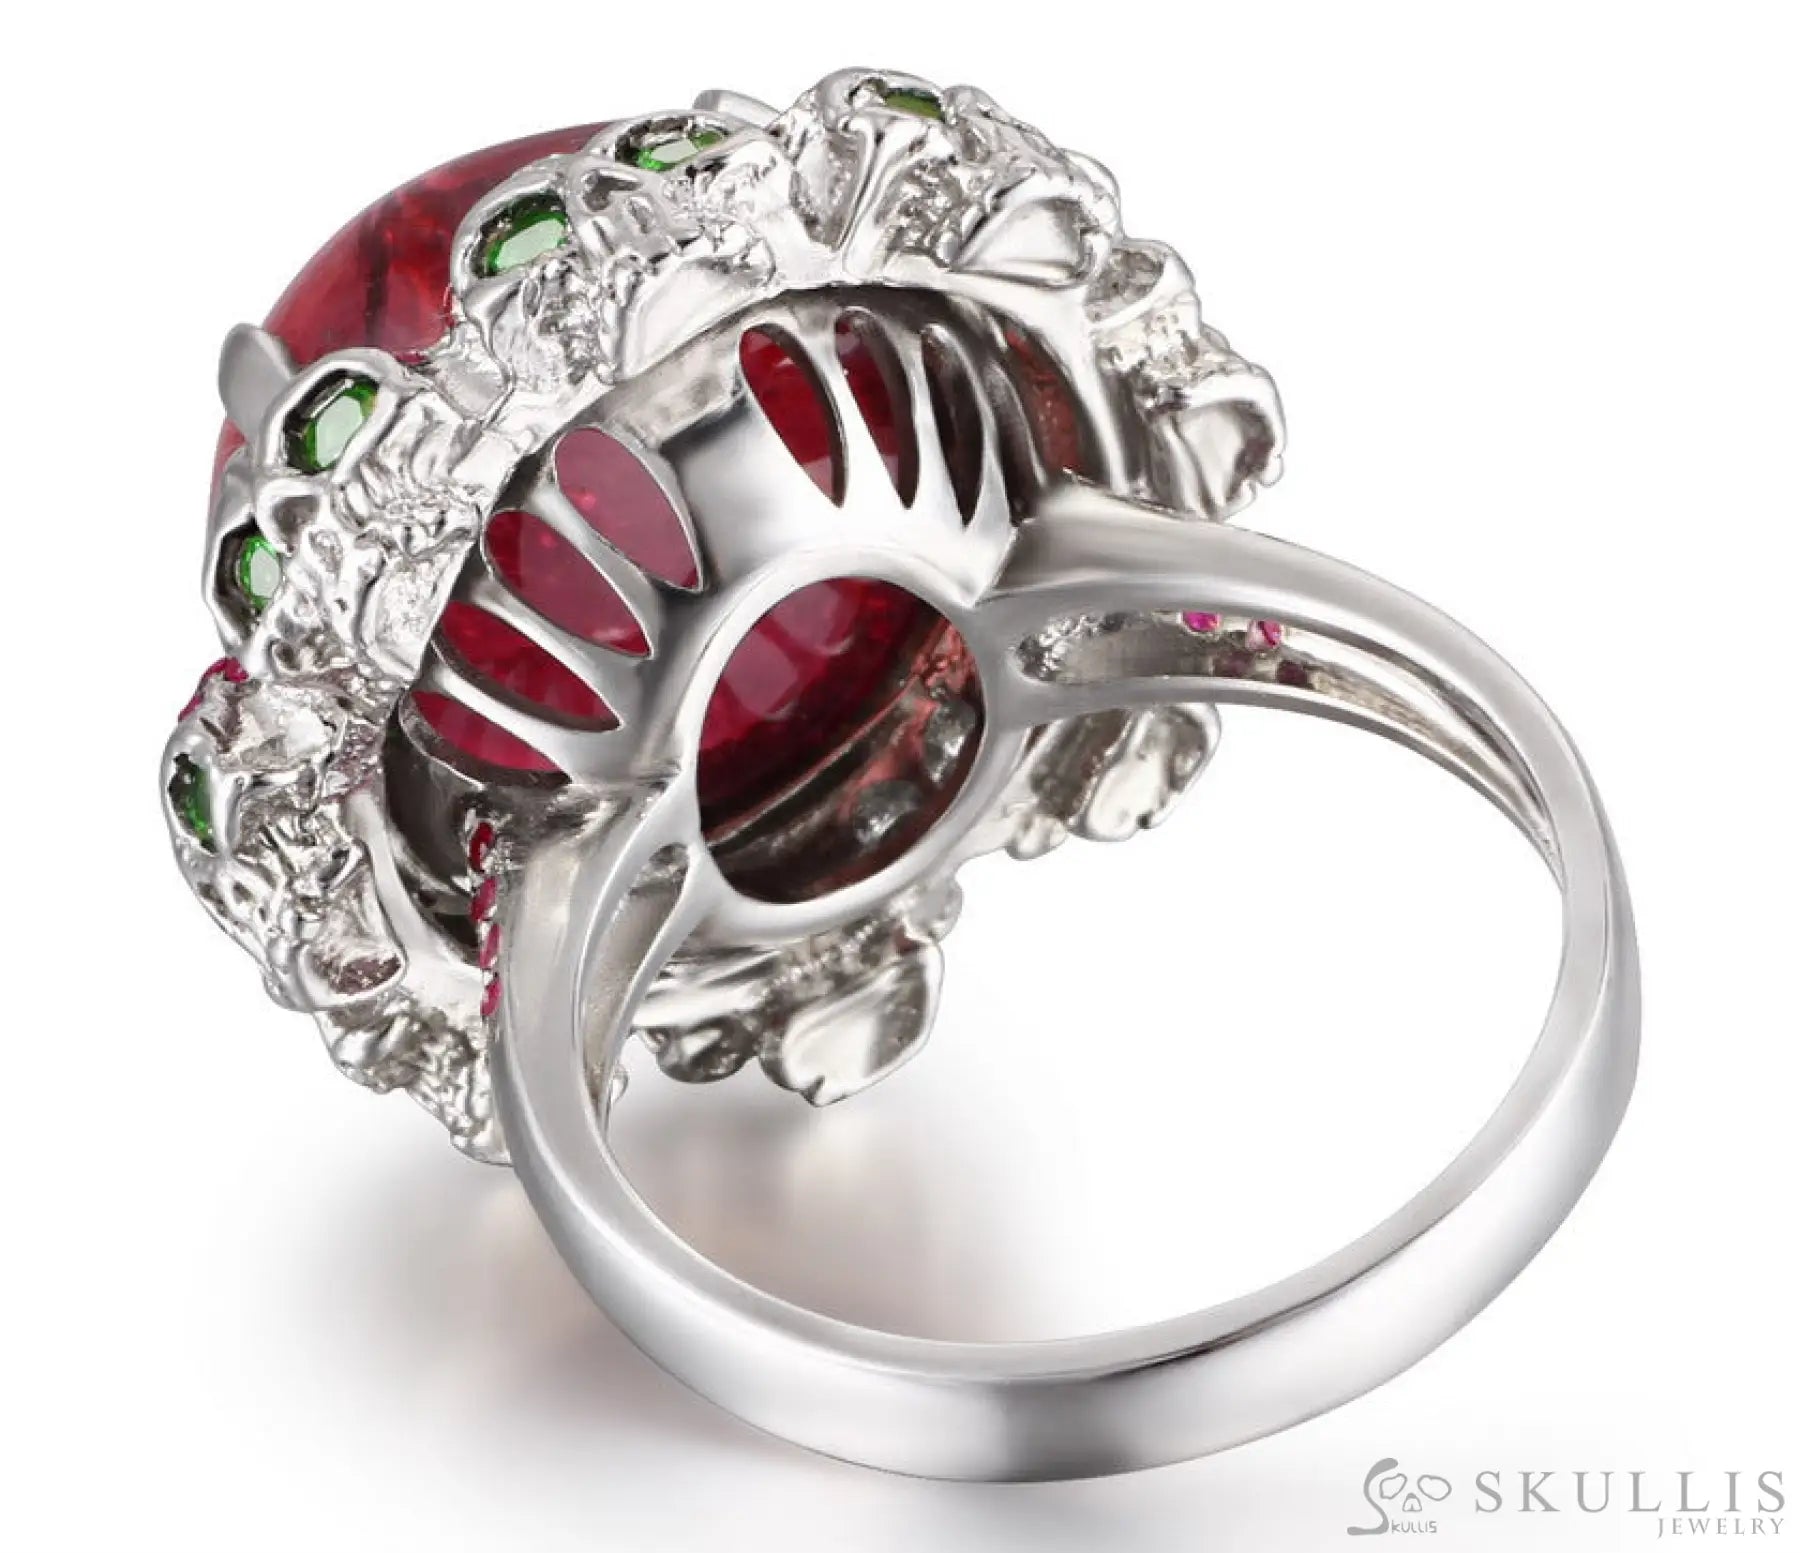 Gem Skull Ring Of Round Cut Ruby Carved With Emerald Eyes Skulls In 925 Sterling Silver Skull Rings